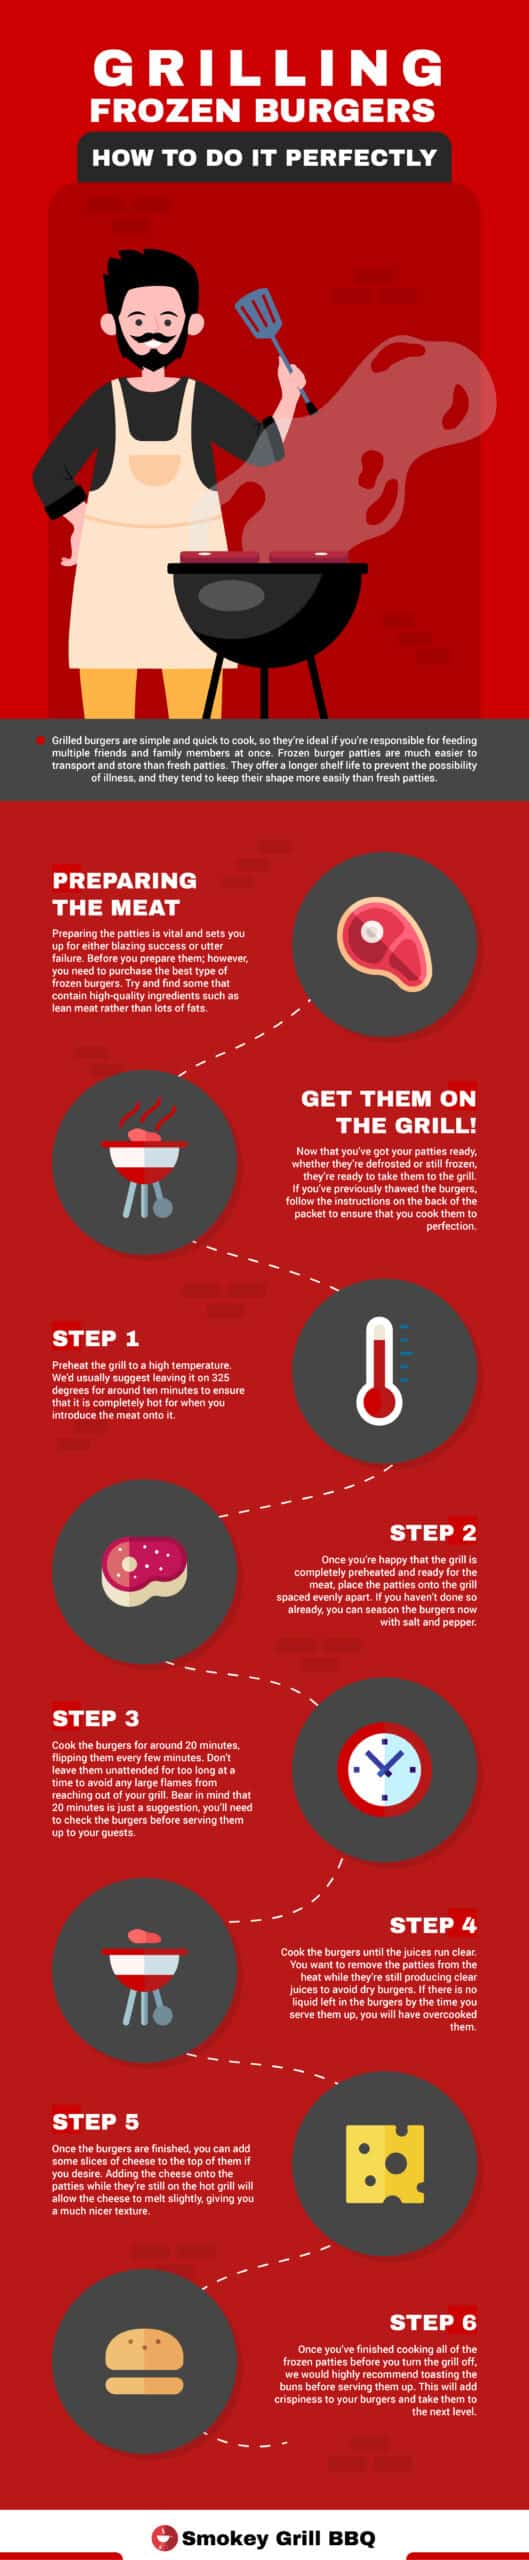 How to grill frozen burgers